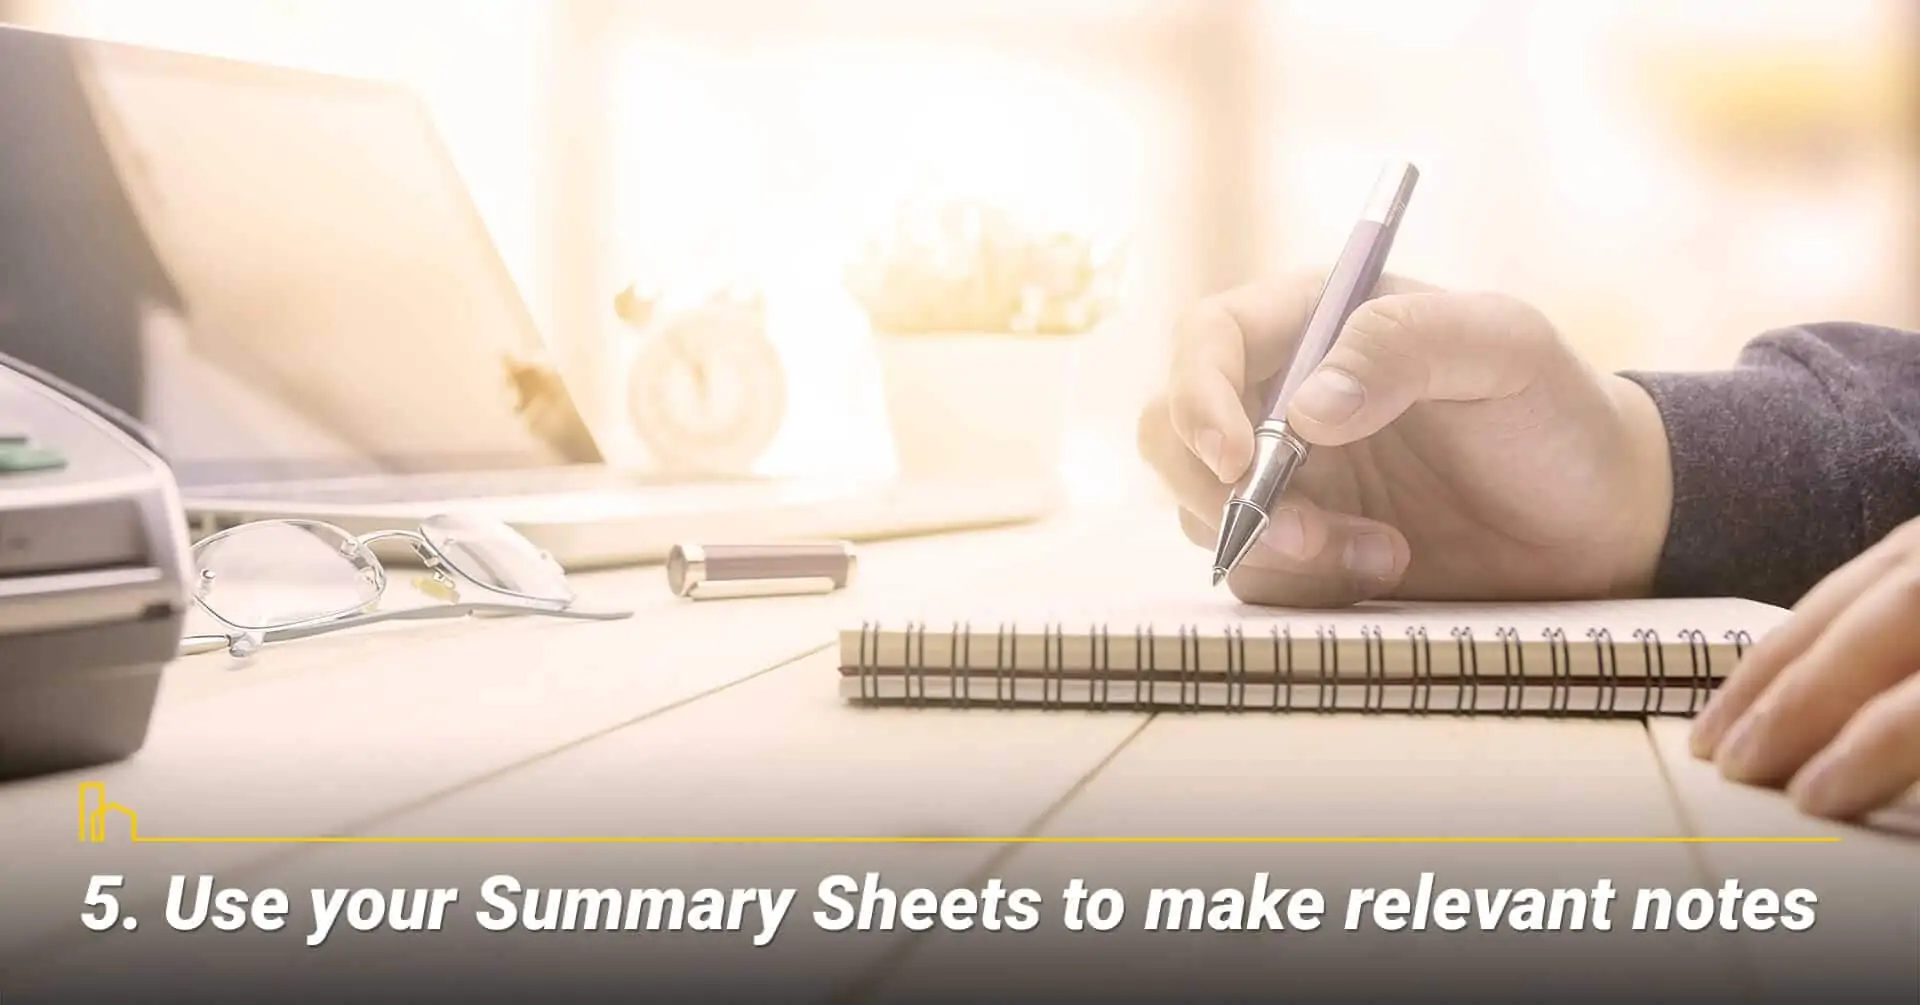 Use your Summary Sheets to make relevant notes, keep track of your notes